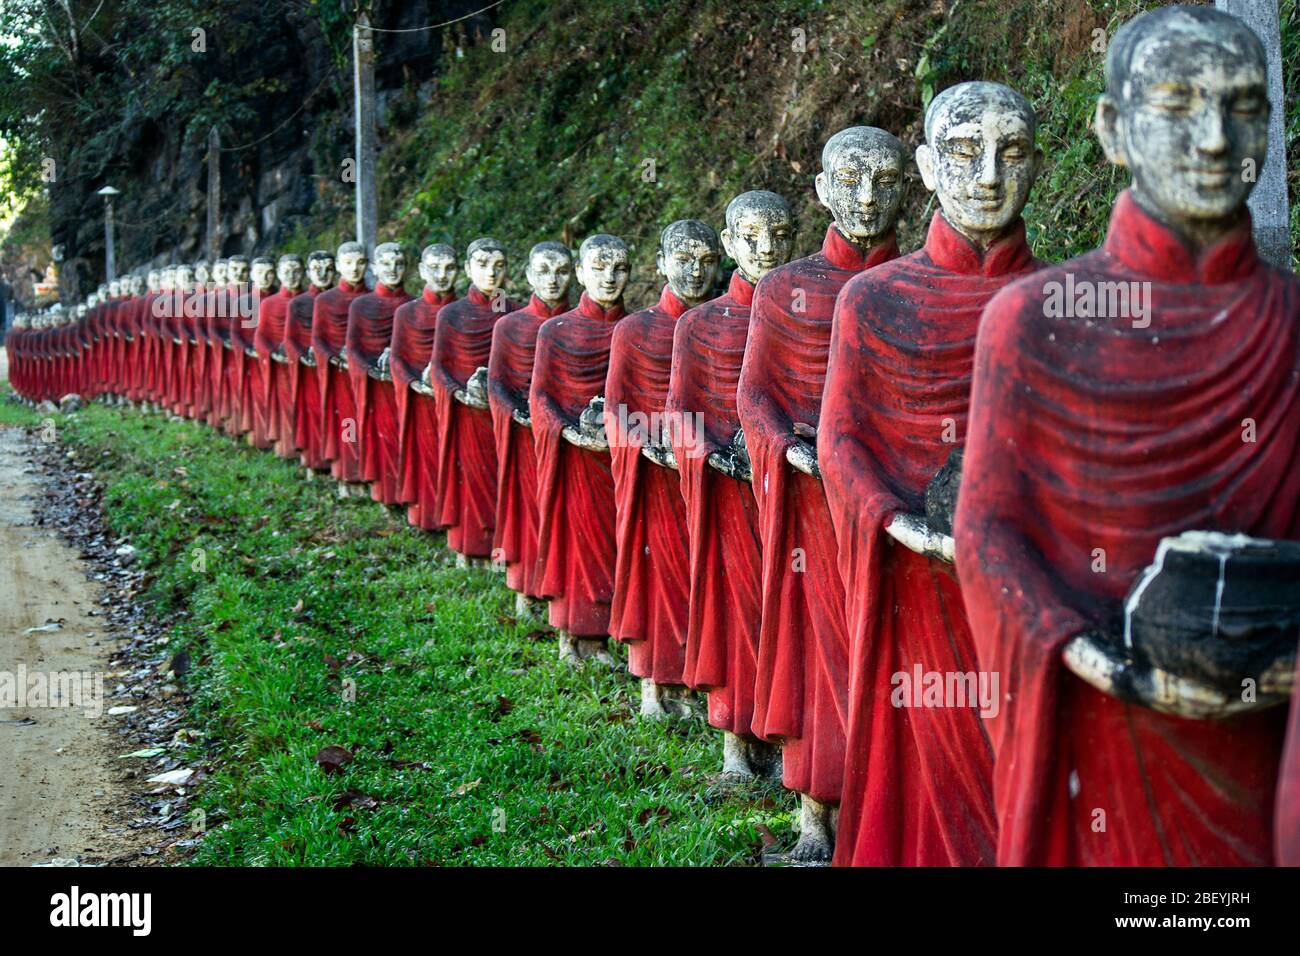 A long row of colourful buddhist monk statues at the entrance of the Kaw Ka Thaung cave temple. Stock Photo